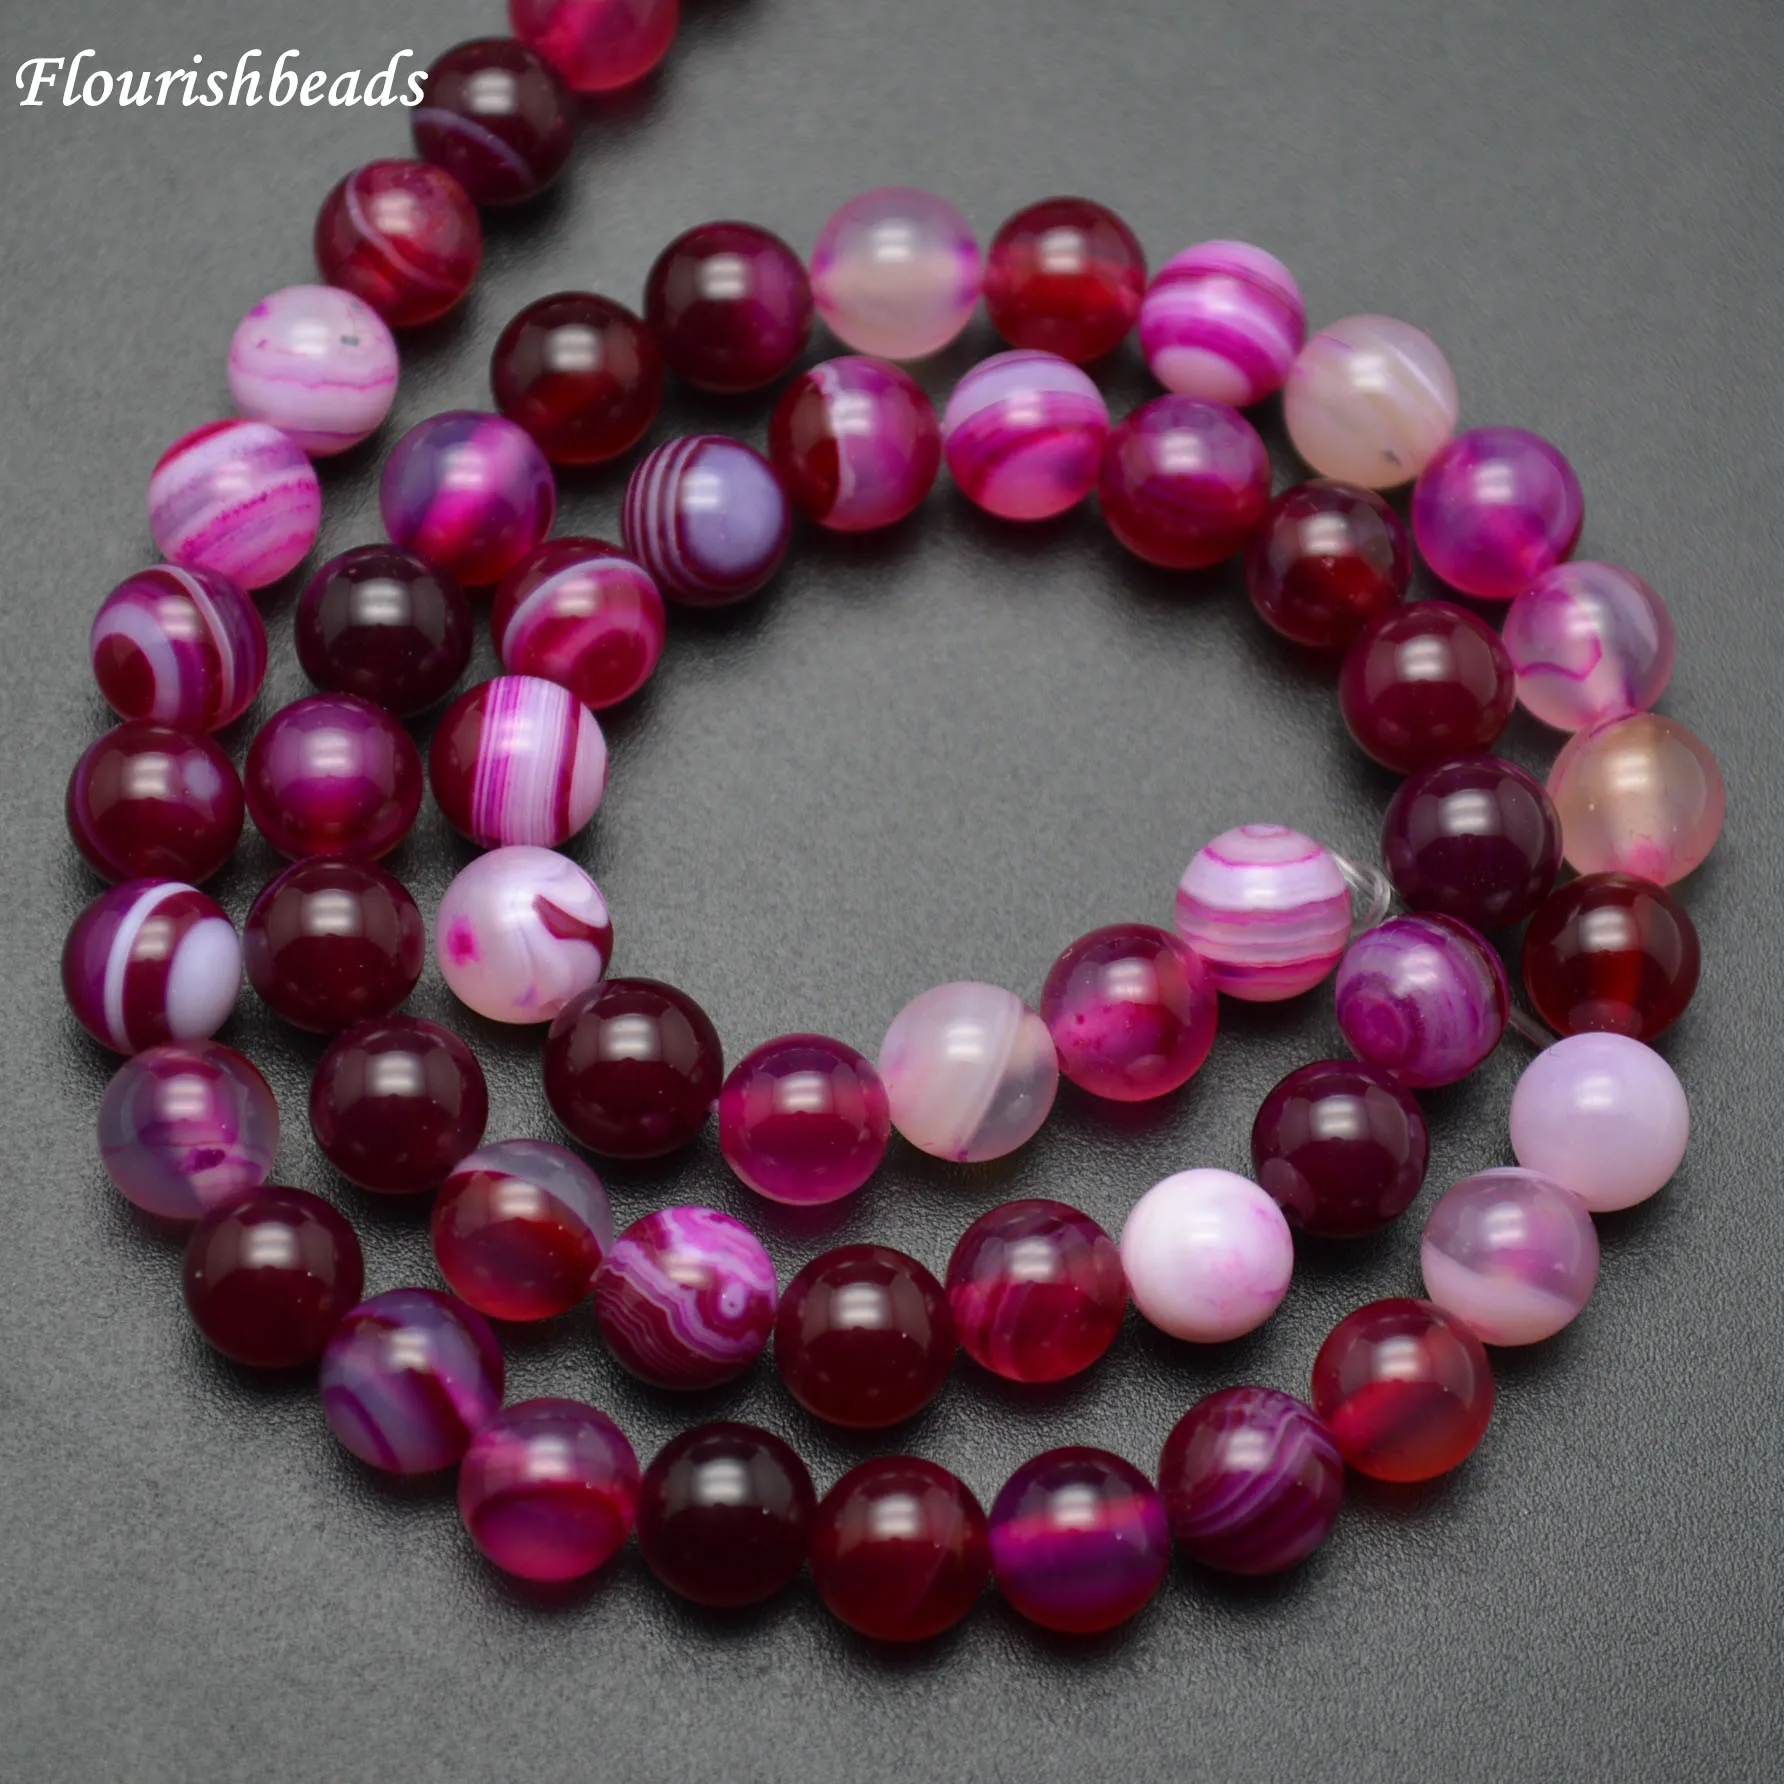 High Quality Fushcia Red Banded Agate Beautiful Veins Stone Round Loose Beads 5 strands per lot 6mm 8mm 10mm | Украшения и - Фото №1